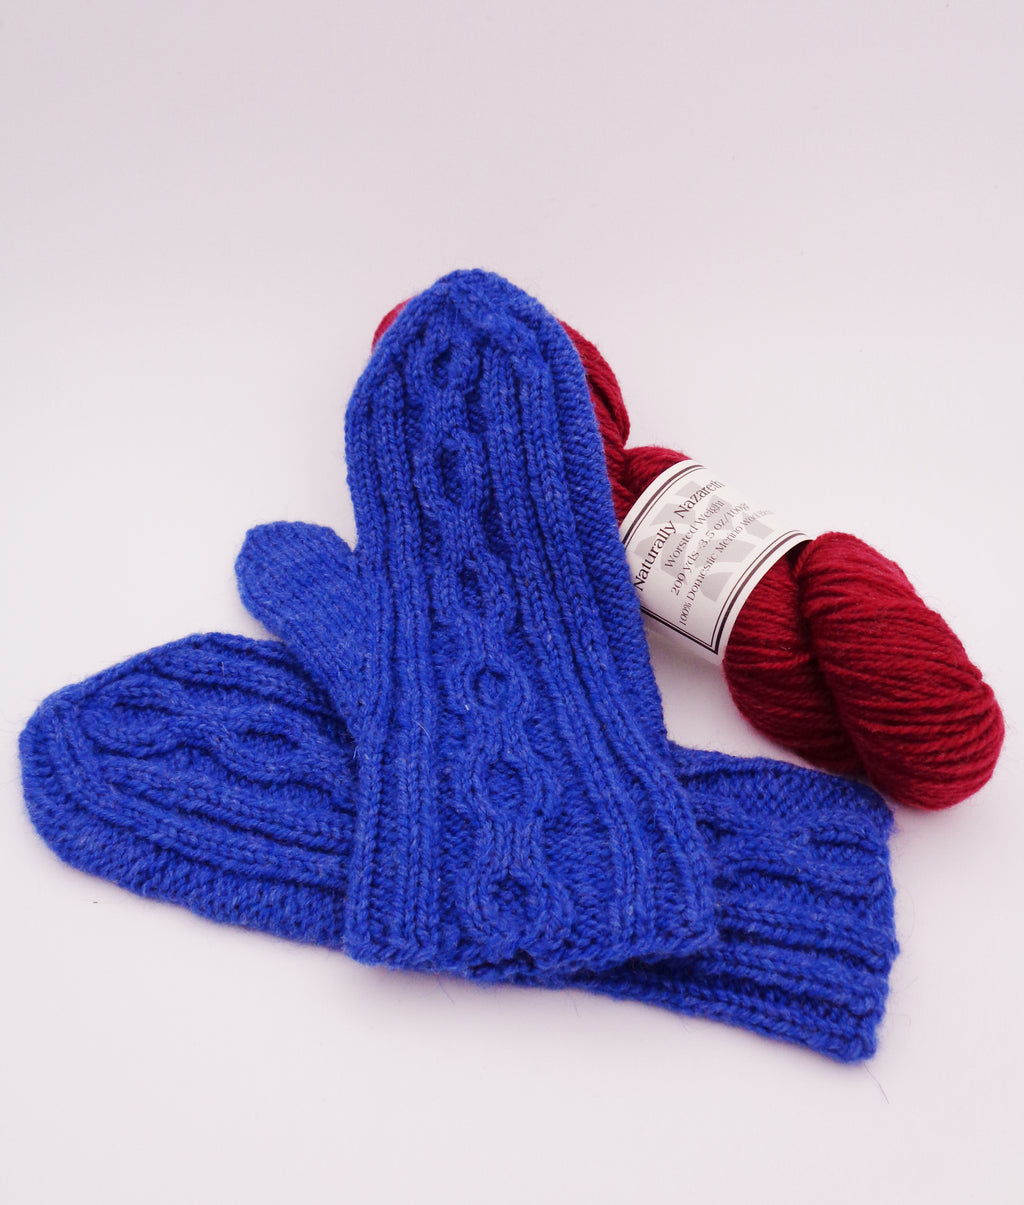 Marvelous Mittens - Designed by Kathy Zimmerman